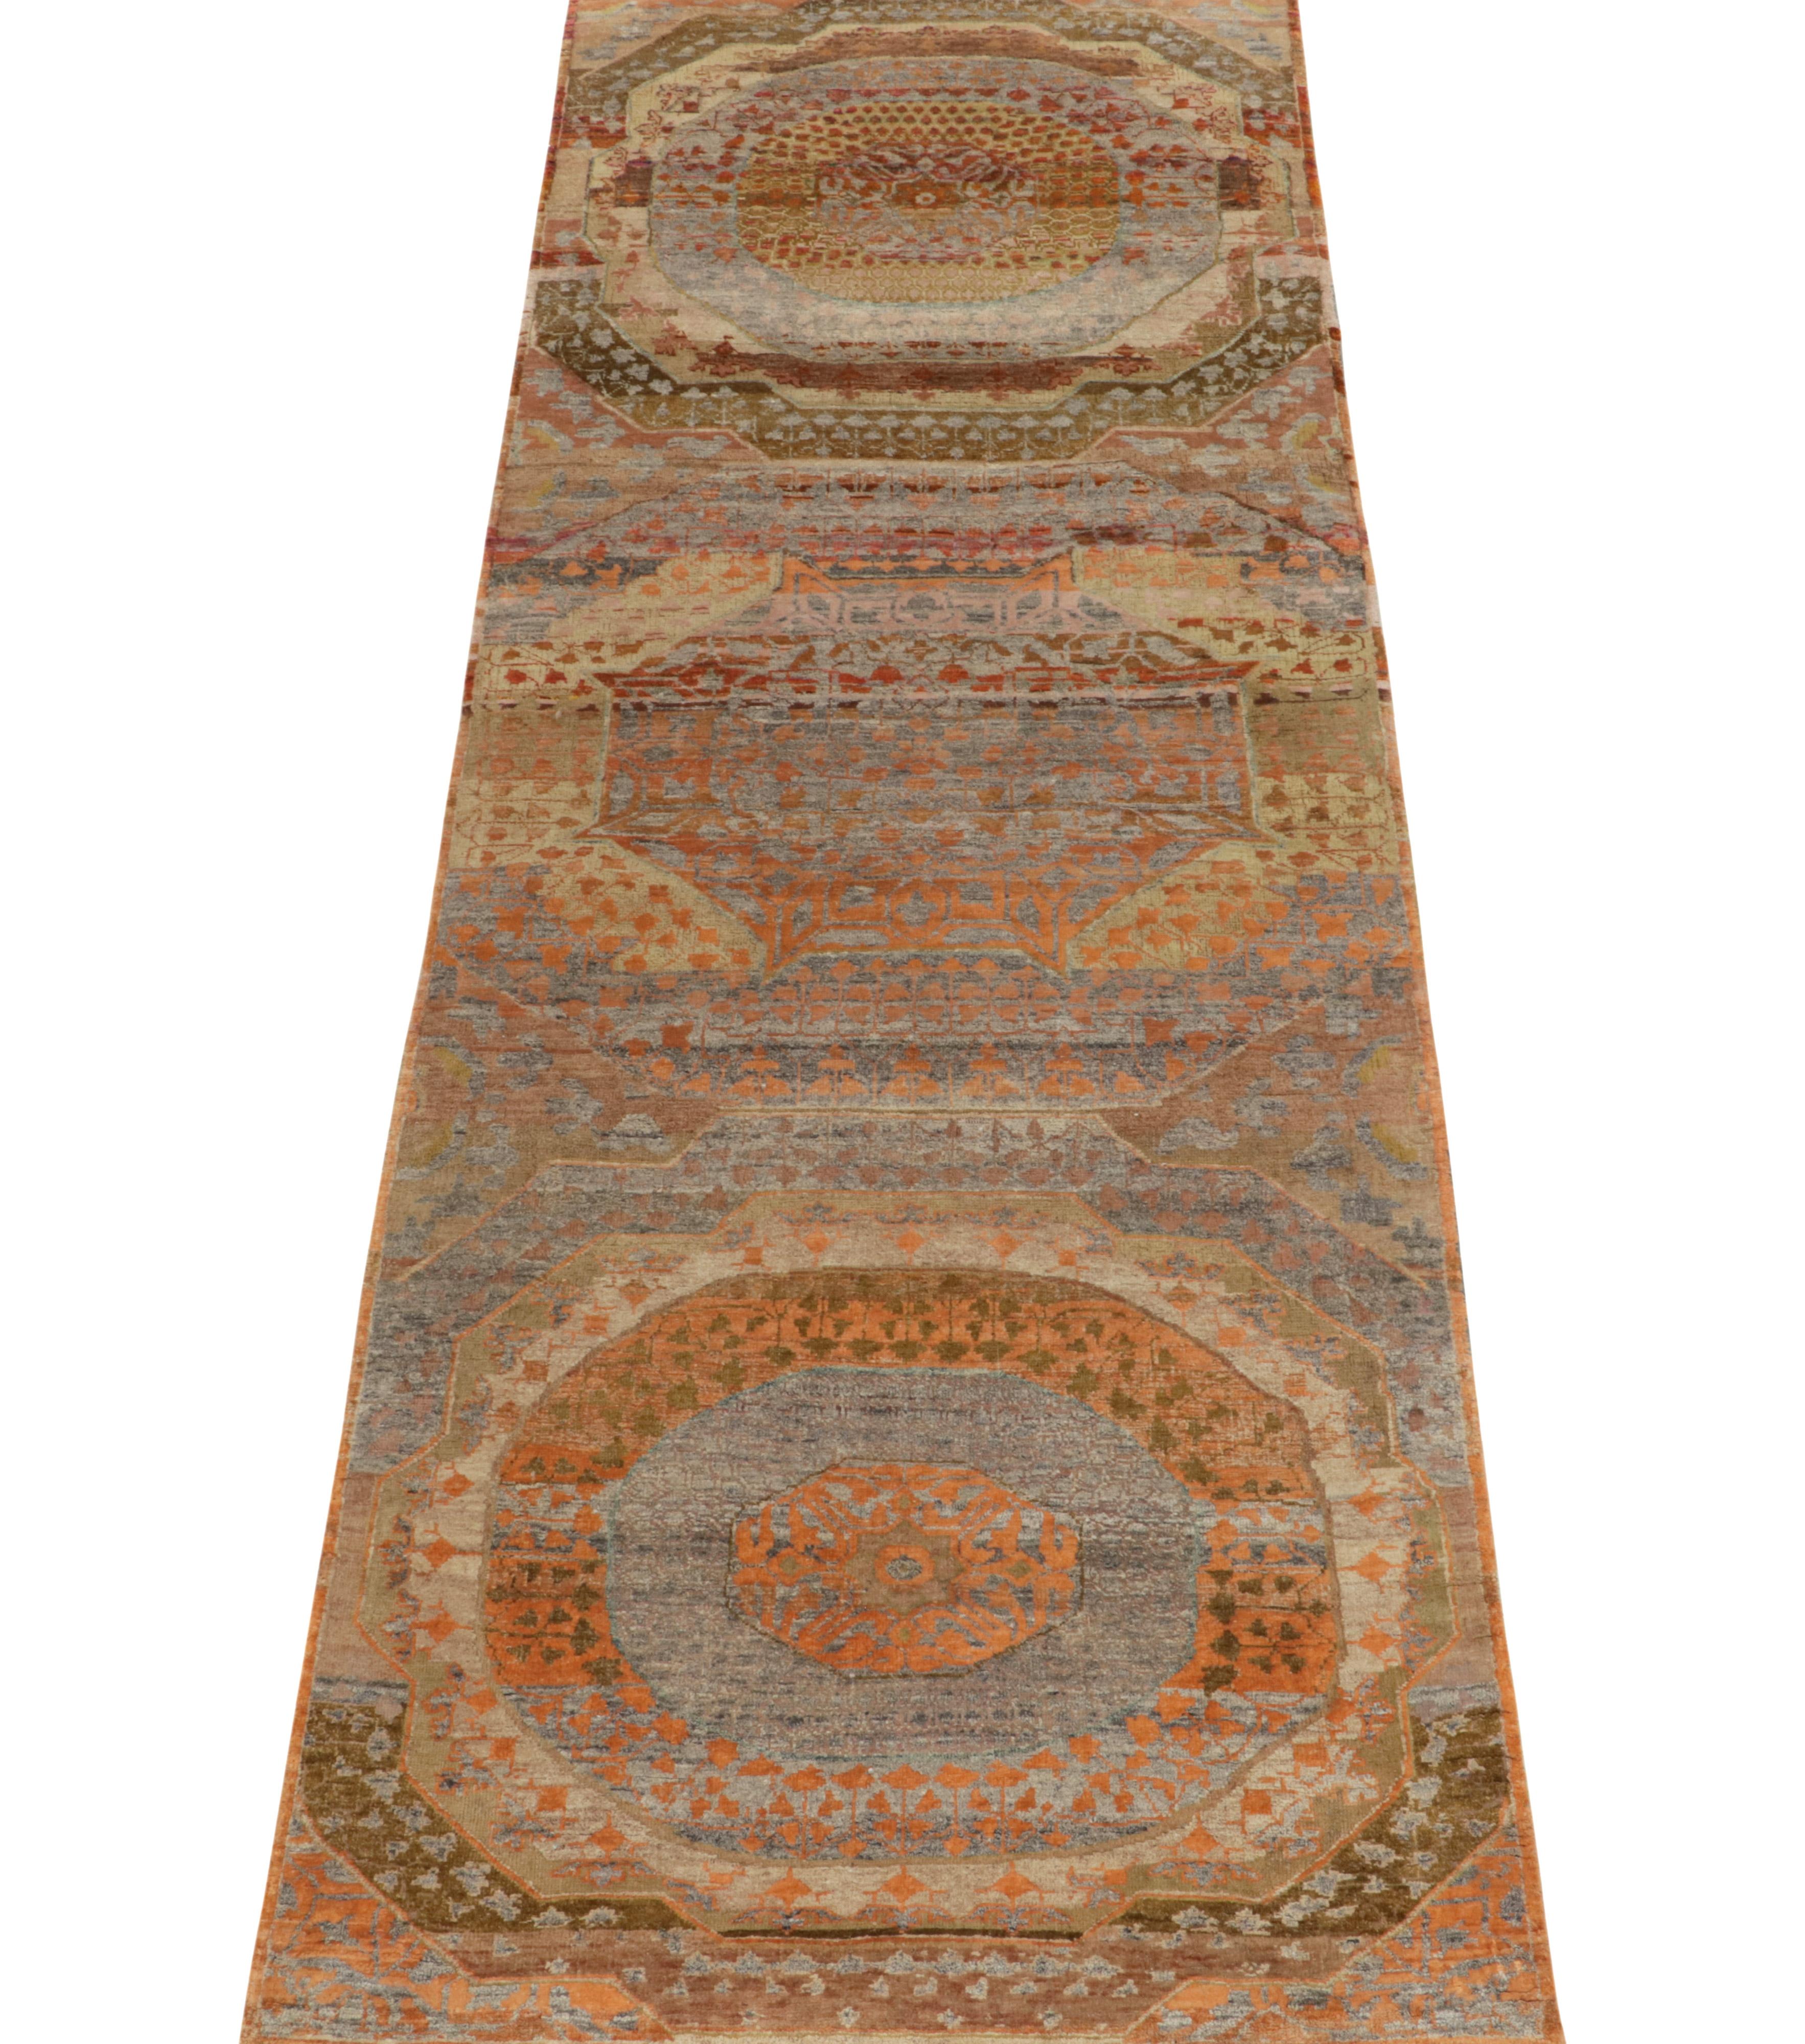 Indian Rug & Kilim’s Classic Agra style runner in Polychromatic Medallion Patterns For Sale